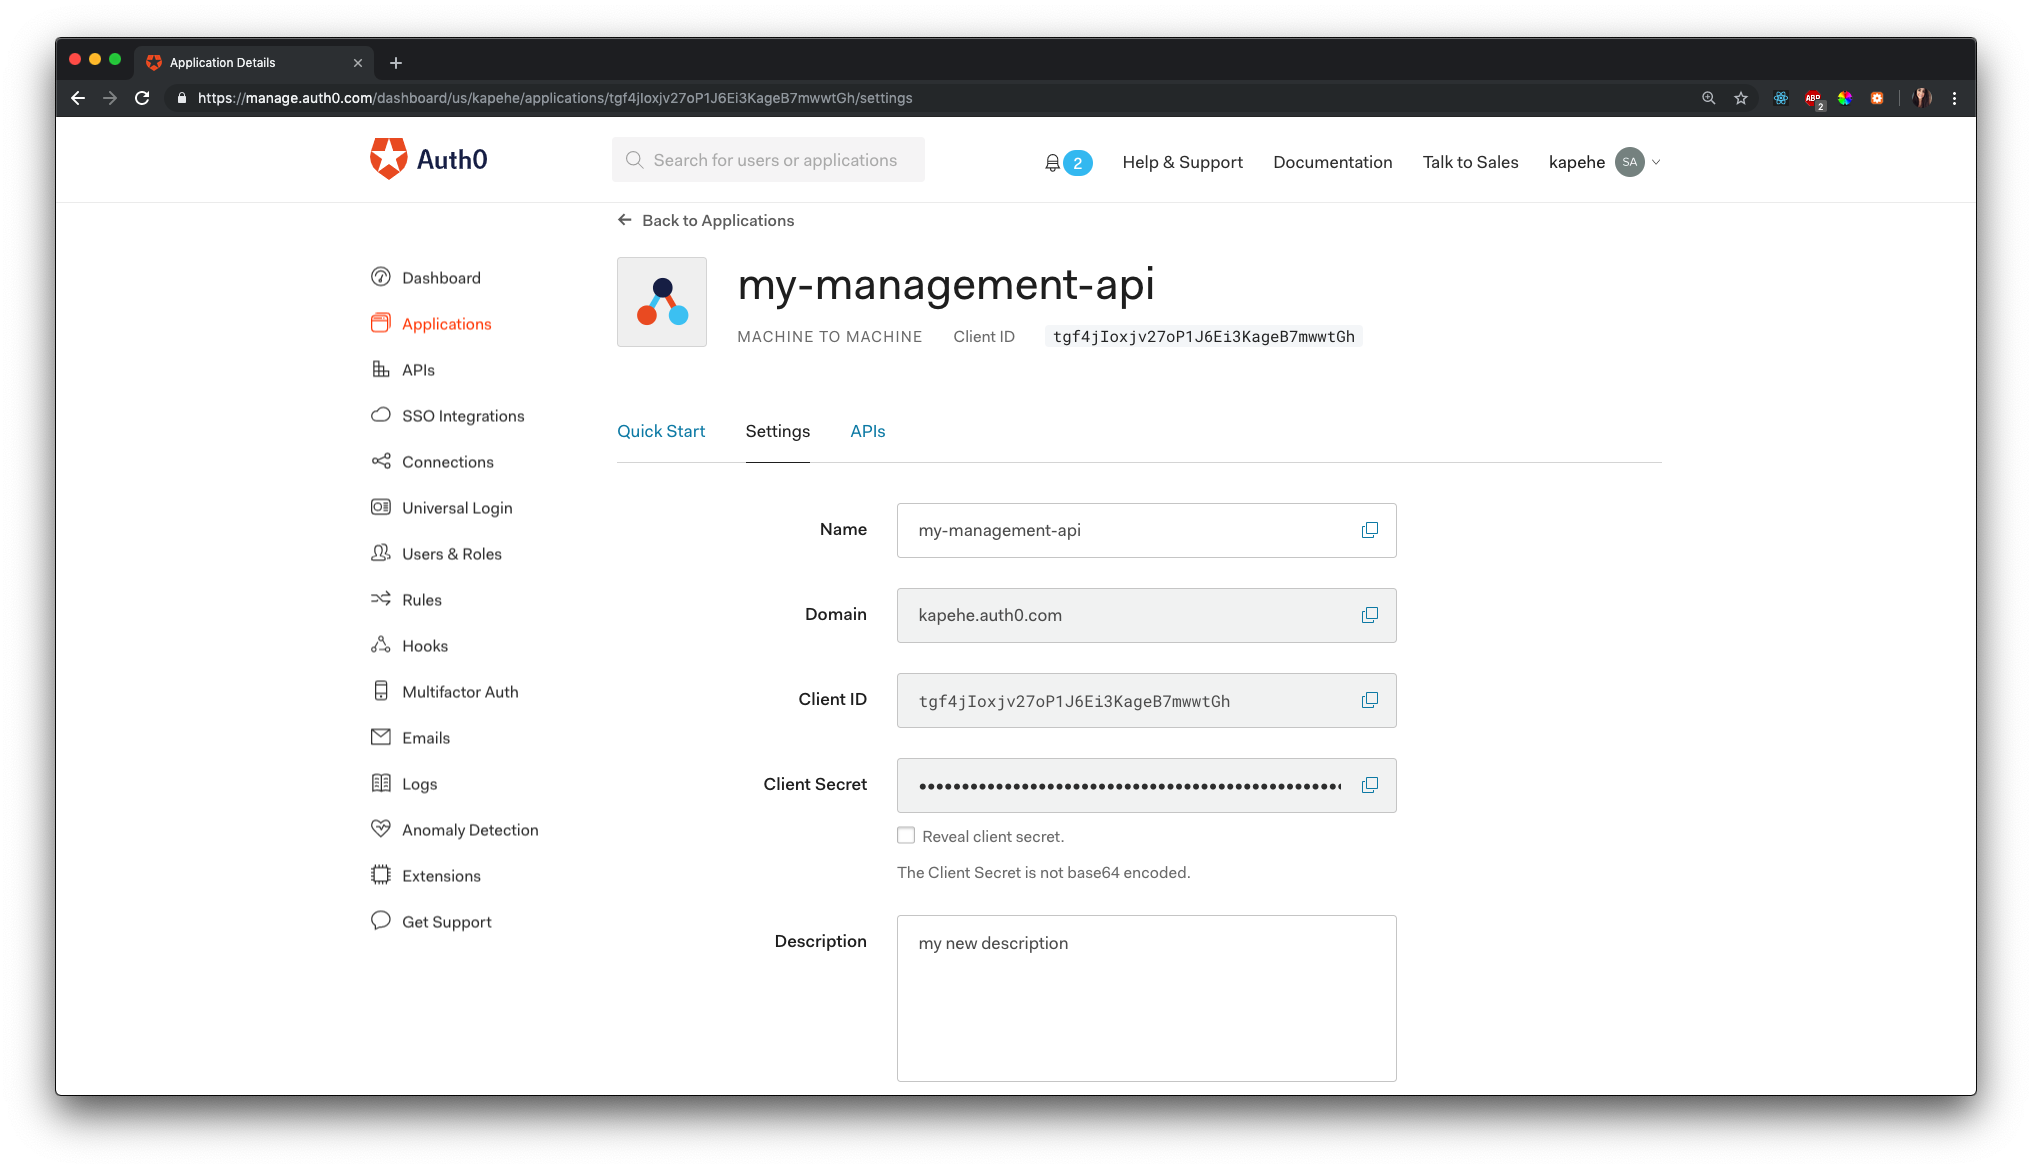 Auth0 application view with updated name and description